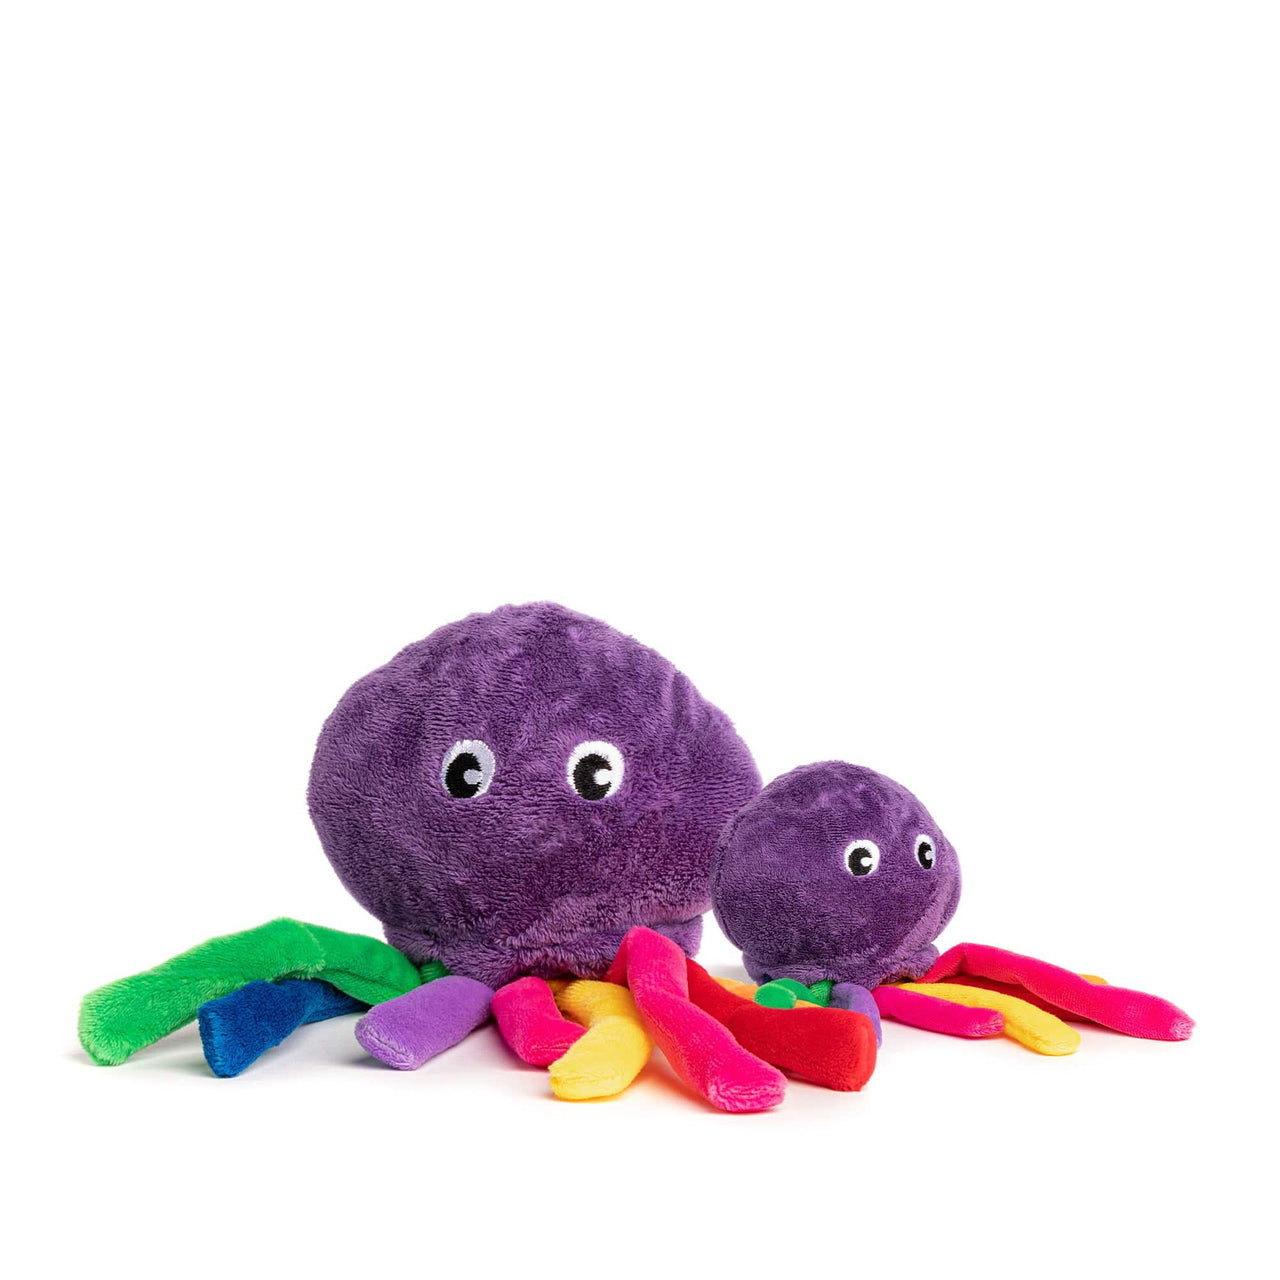 Large 4" and small 3" purple octopus faball® with rainbow colored arms